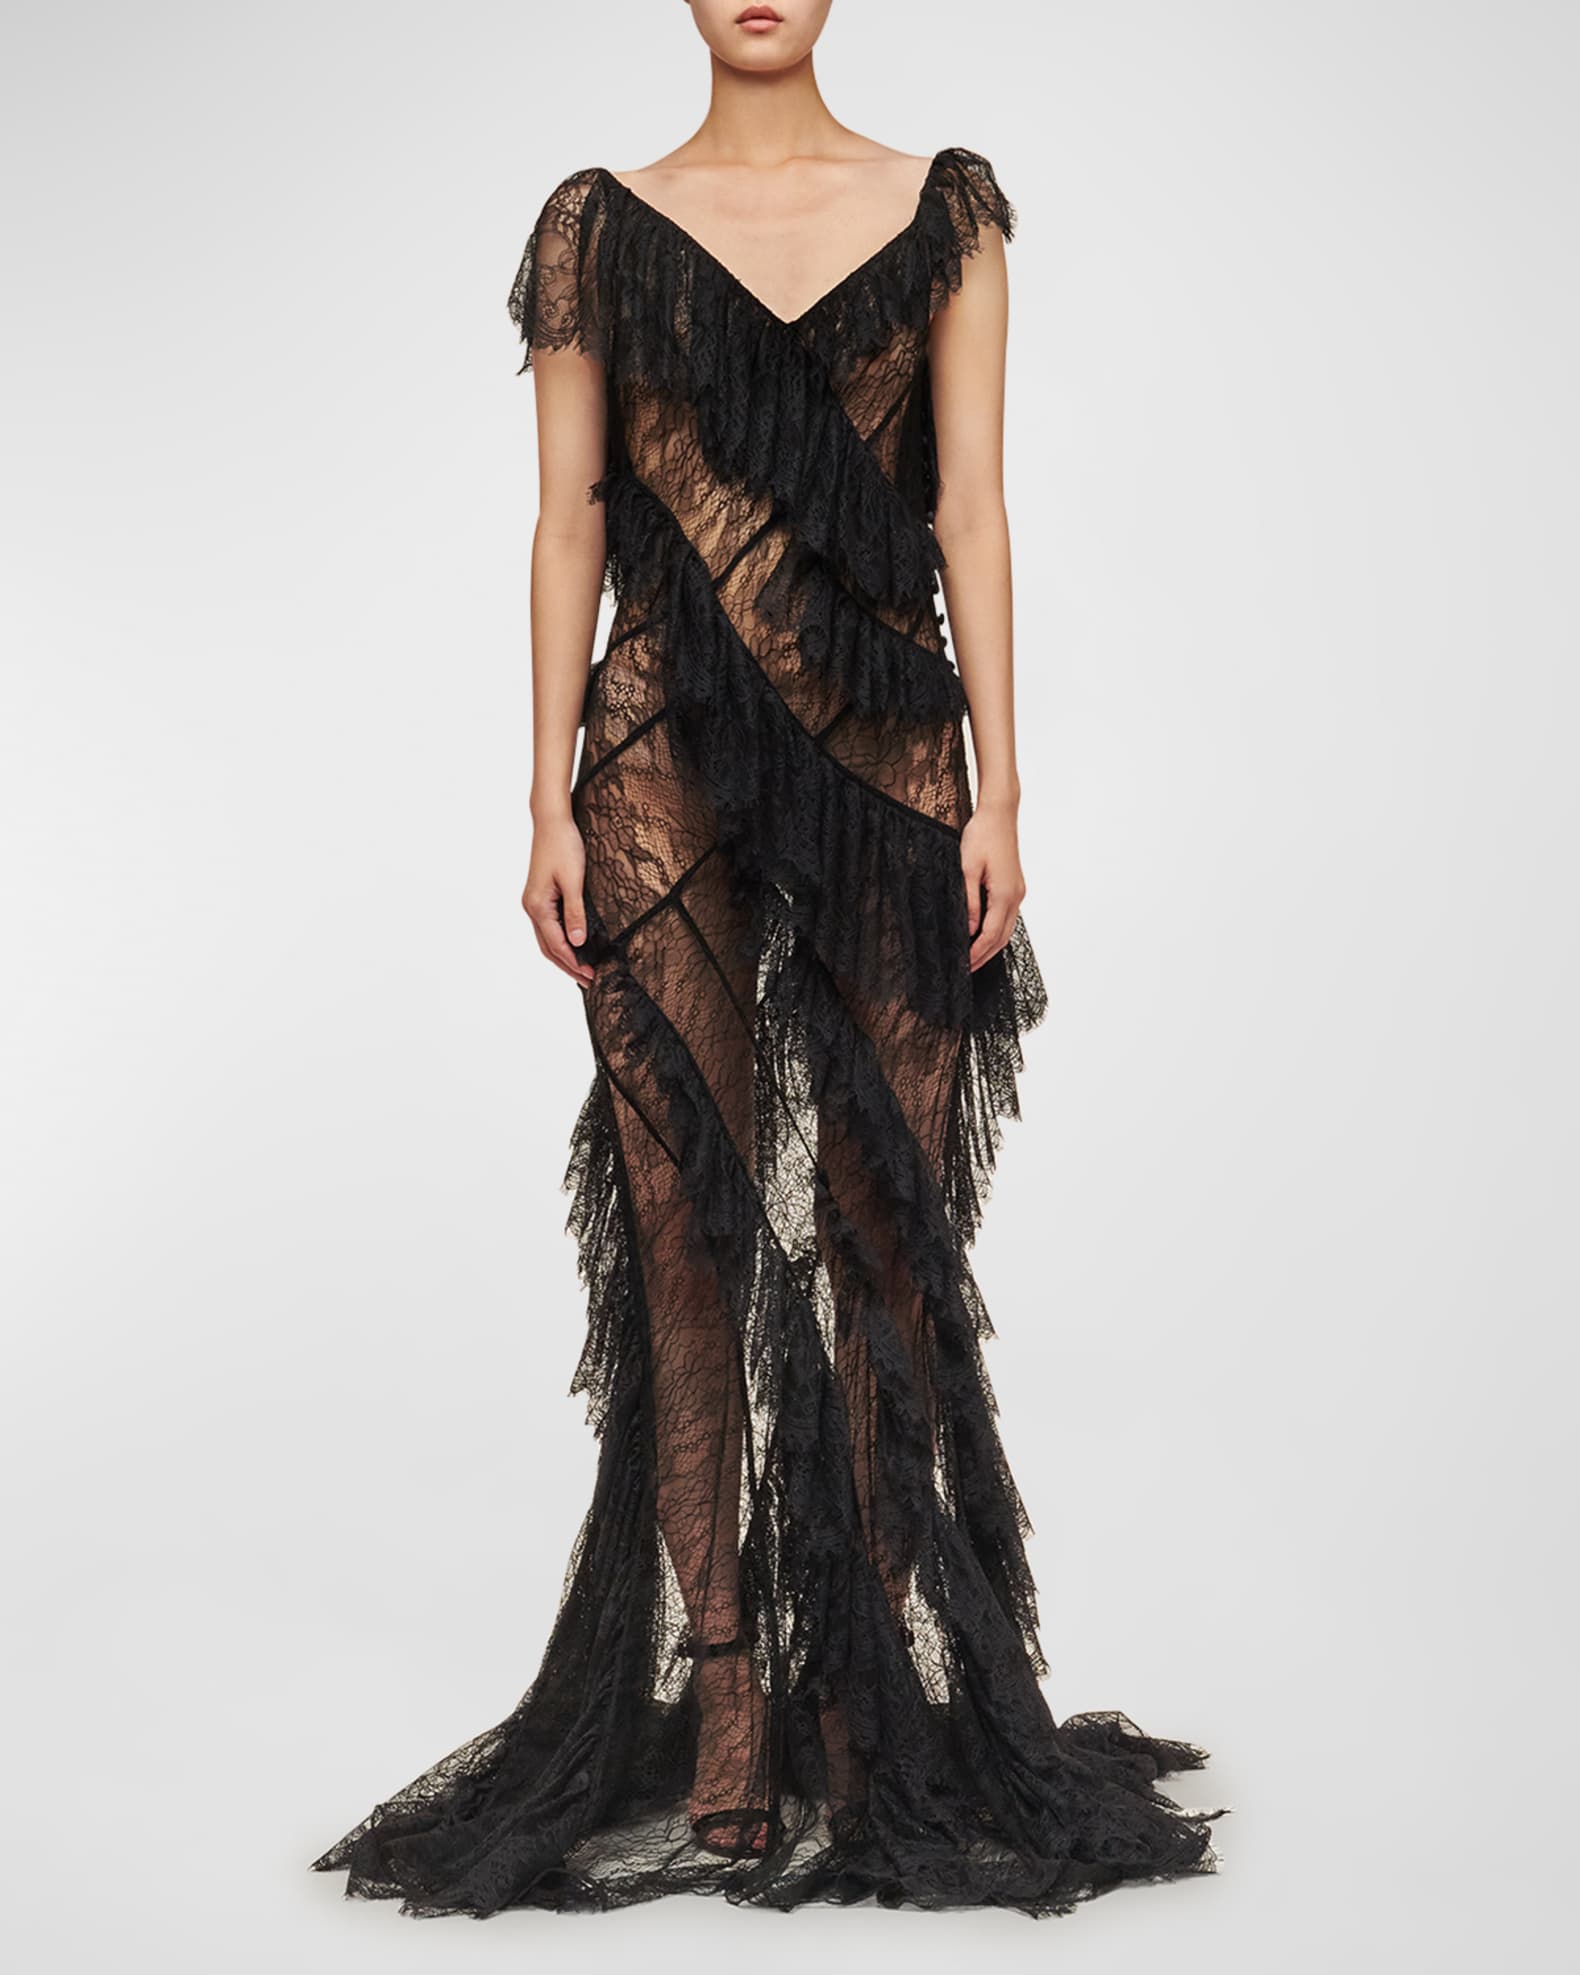 INTERIOR Cosmos Cascading Ruffle Sheer Open-Back Lace Gown | Neiman Marcus